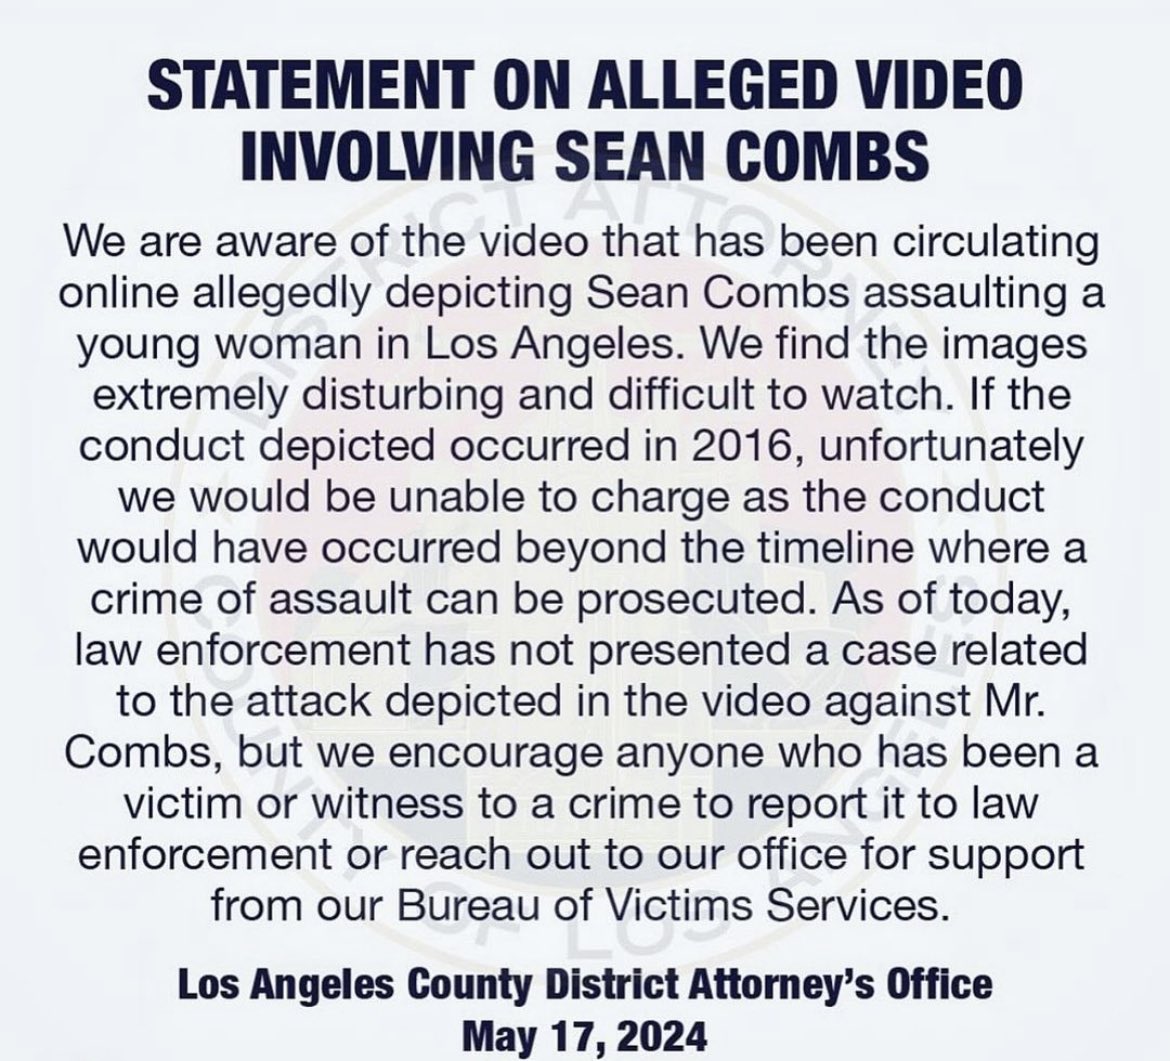 The LA Police say they can’t arrest Diddy over the Cassie video because it happened too long ago